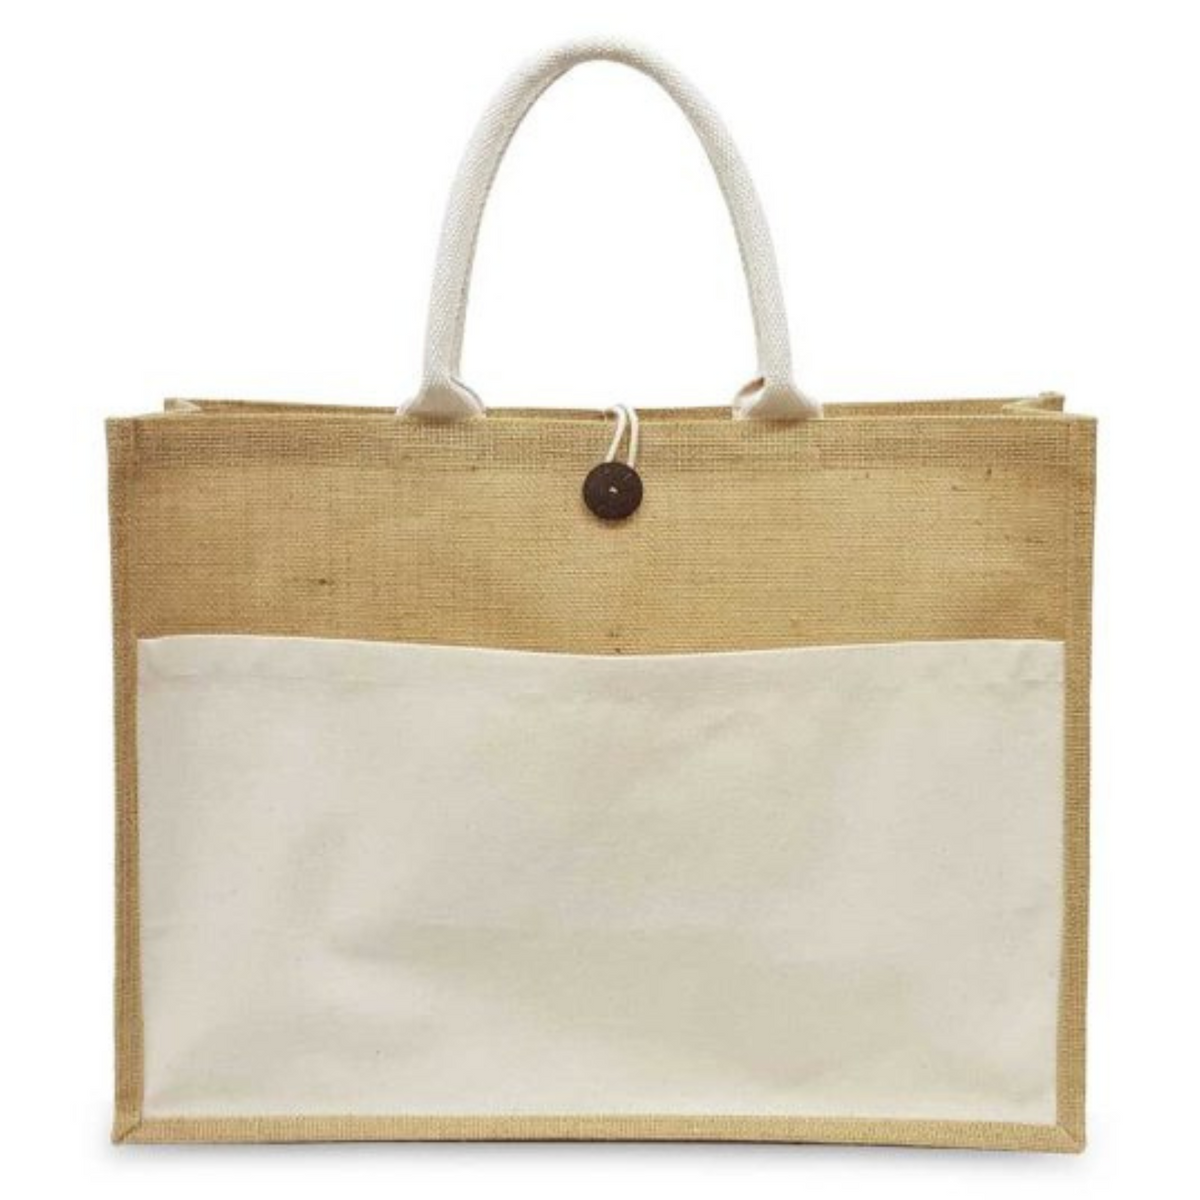 Customized Jute Bags with Cotton Pocket